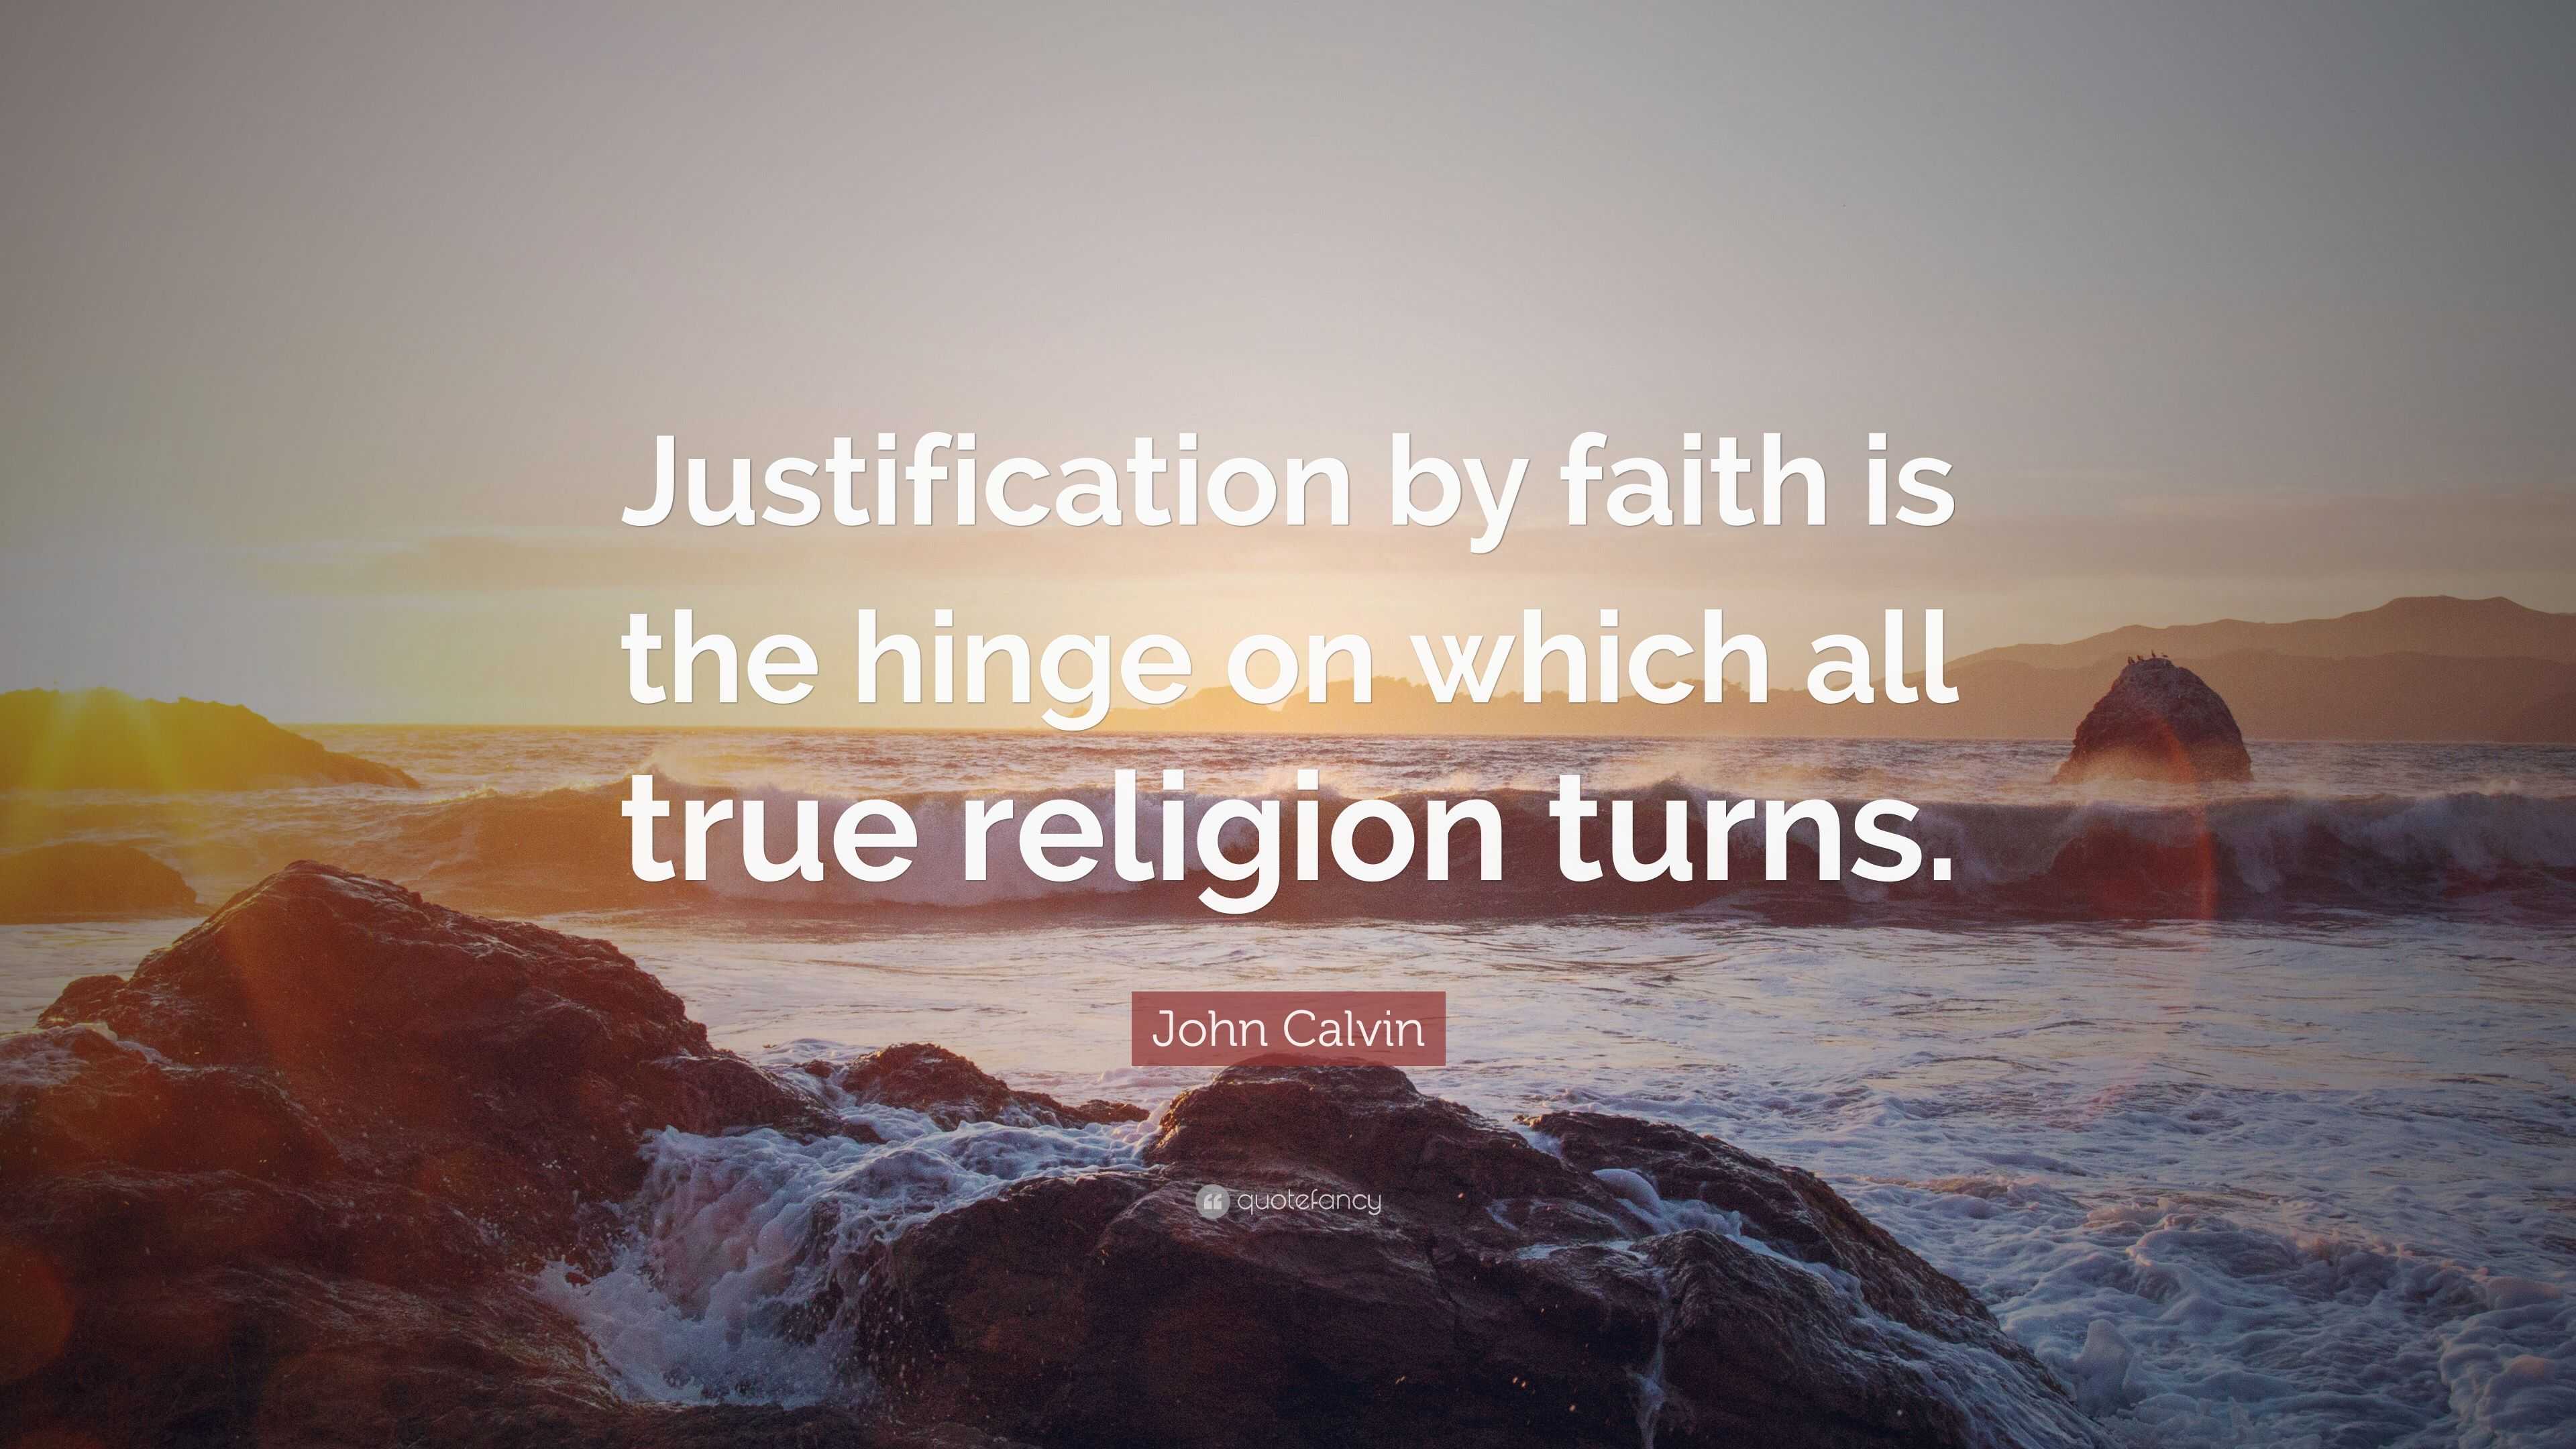 John Calvin Quote: “Justification by faith is the hinge on which all ...